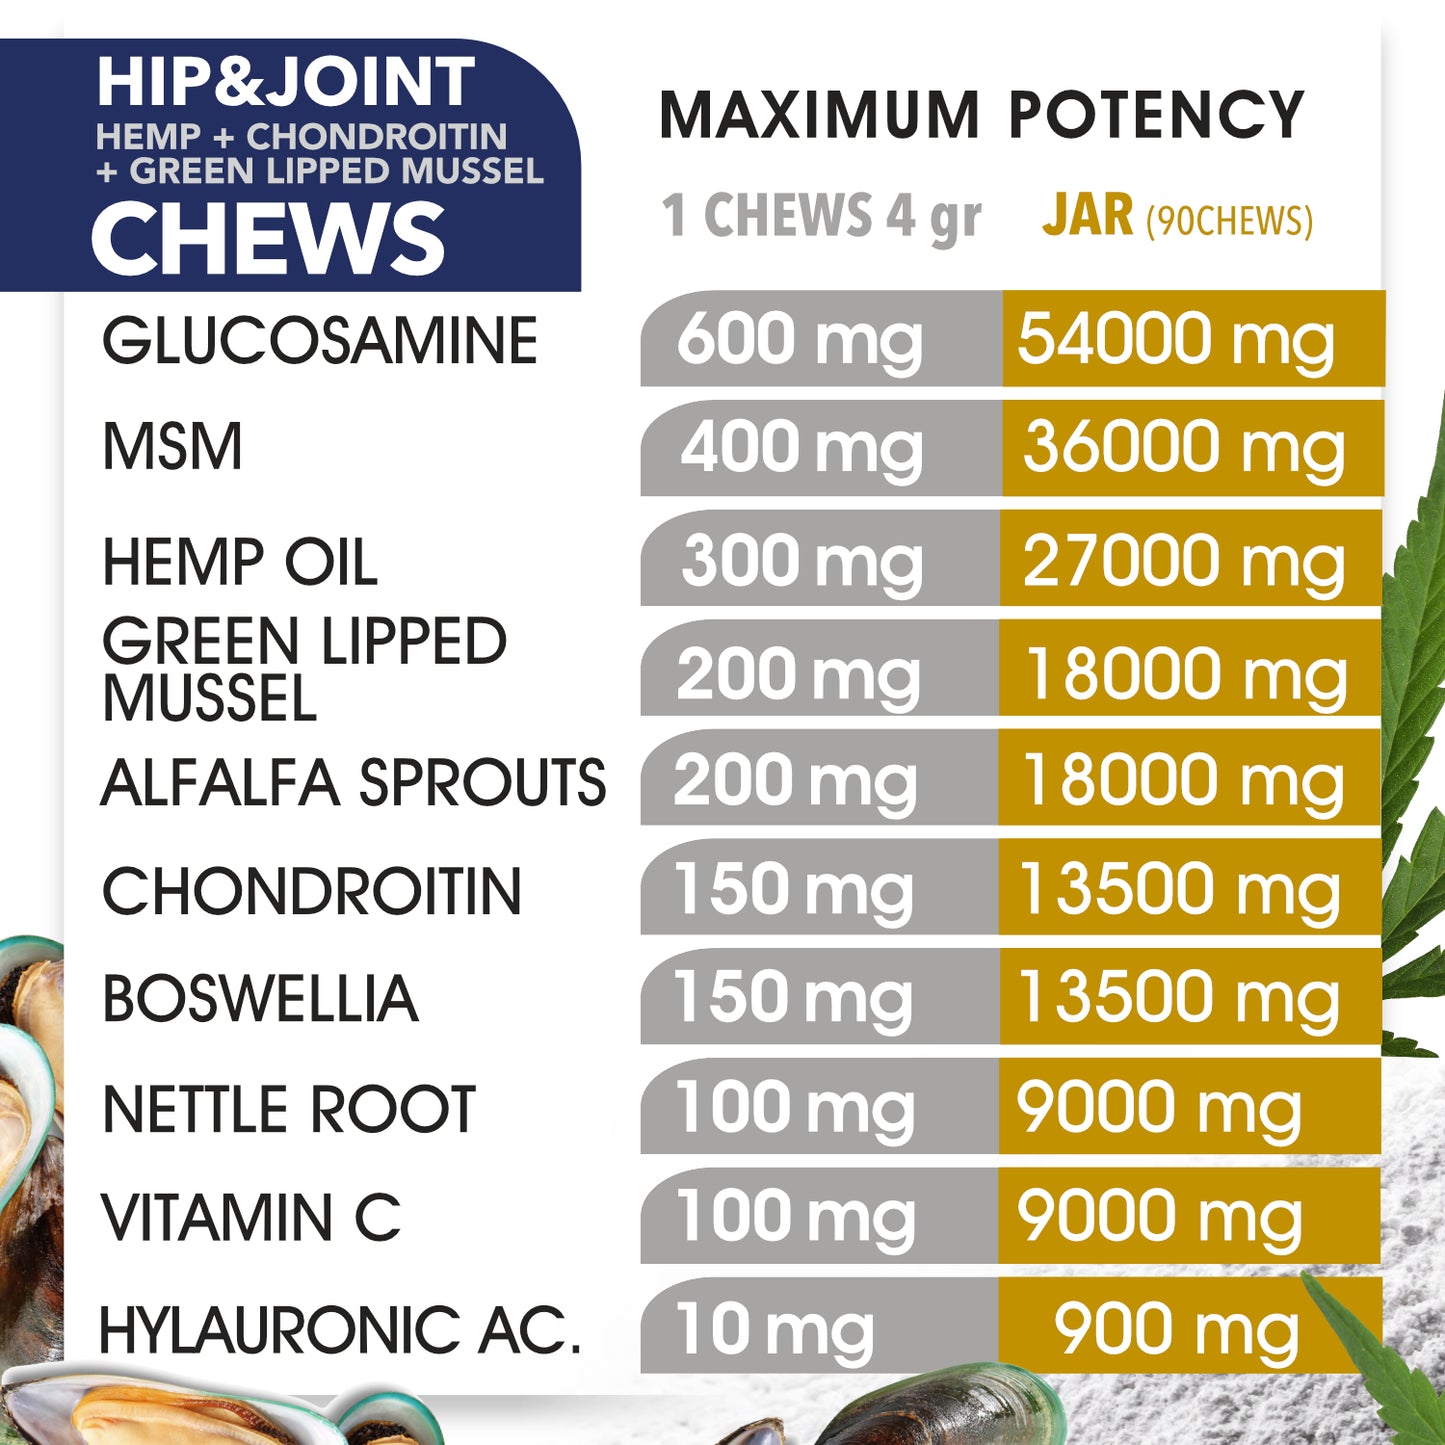 Hip & Joint Chews Advanced Mobility for Senior Dog